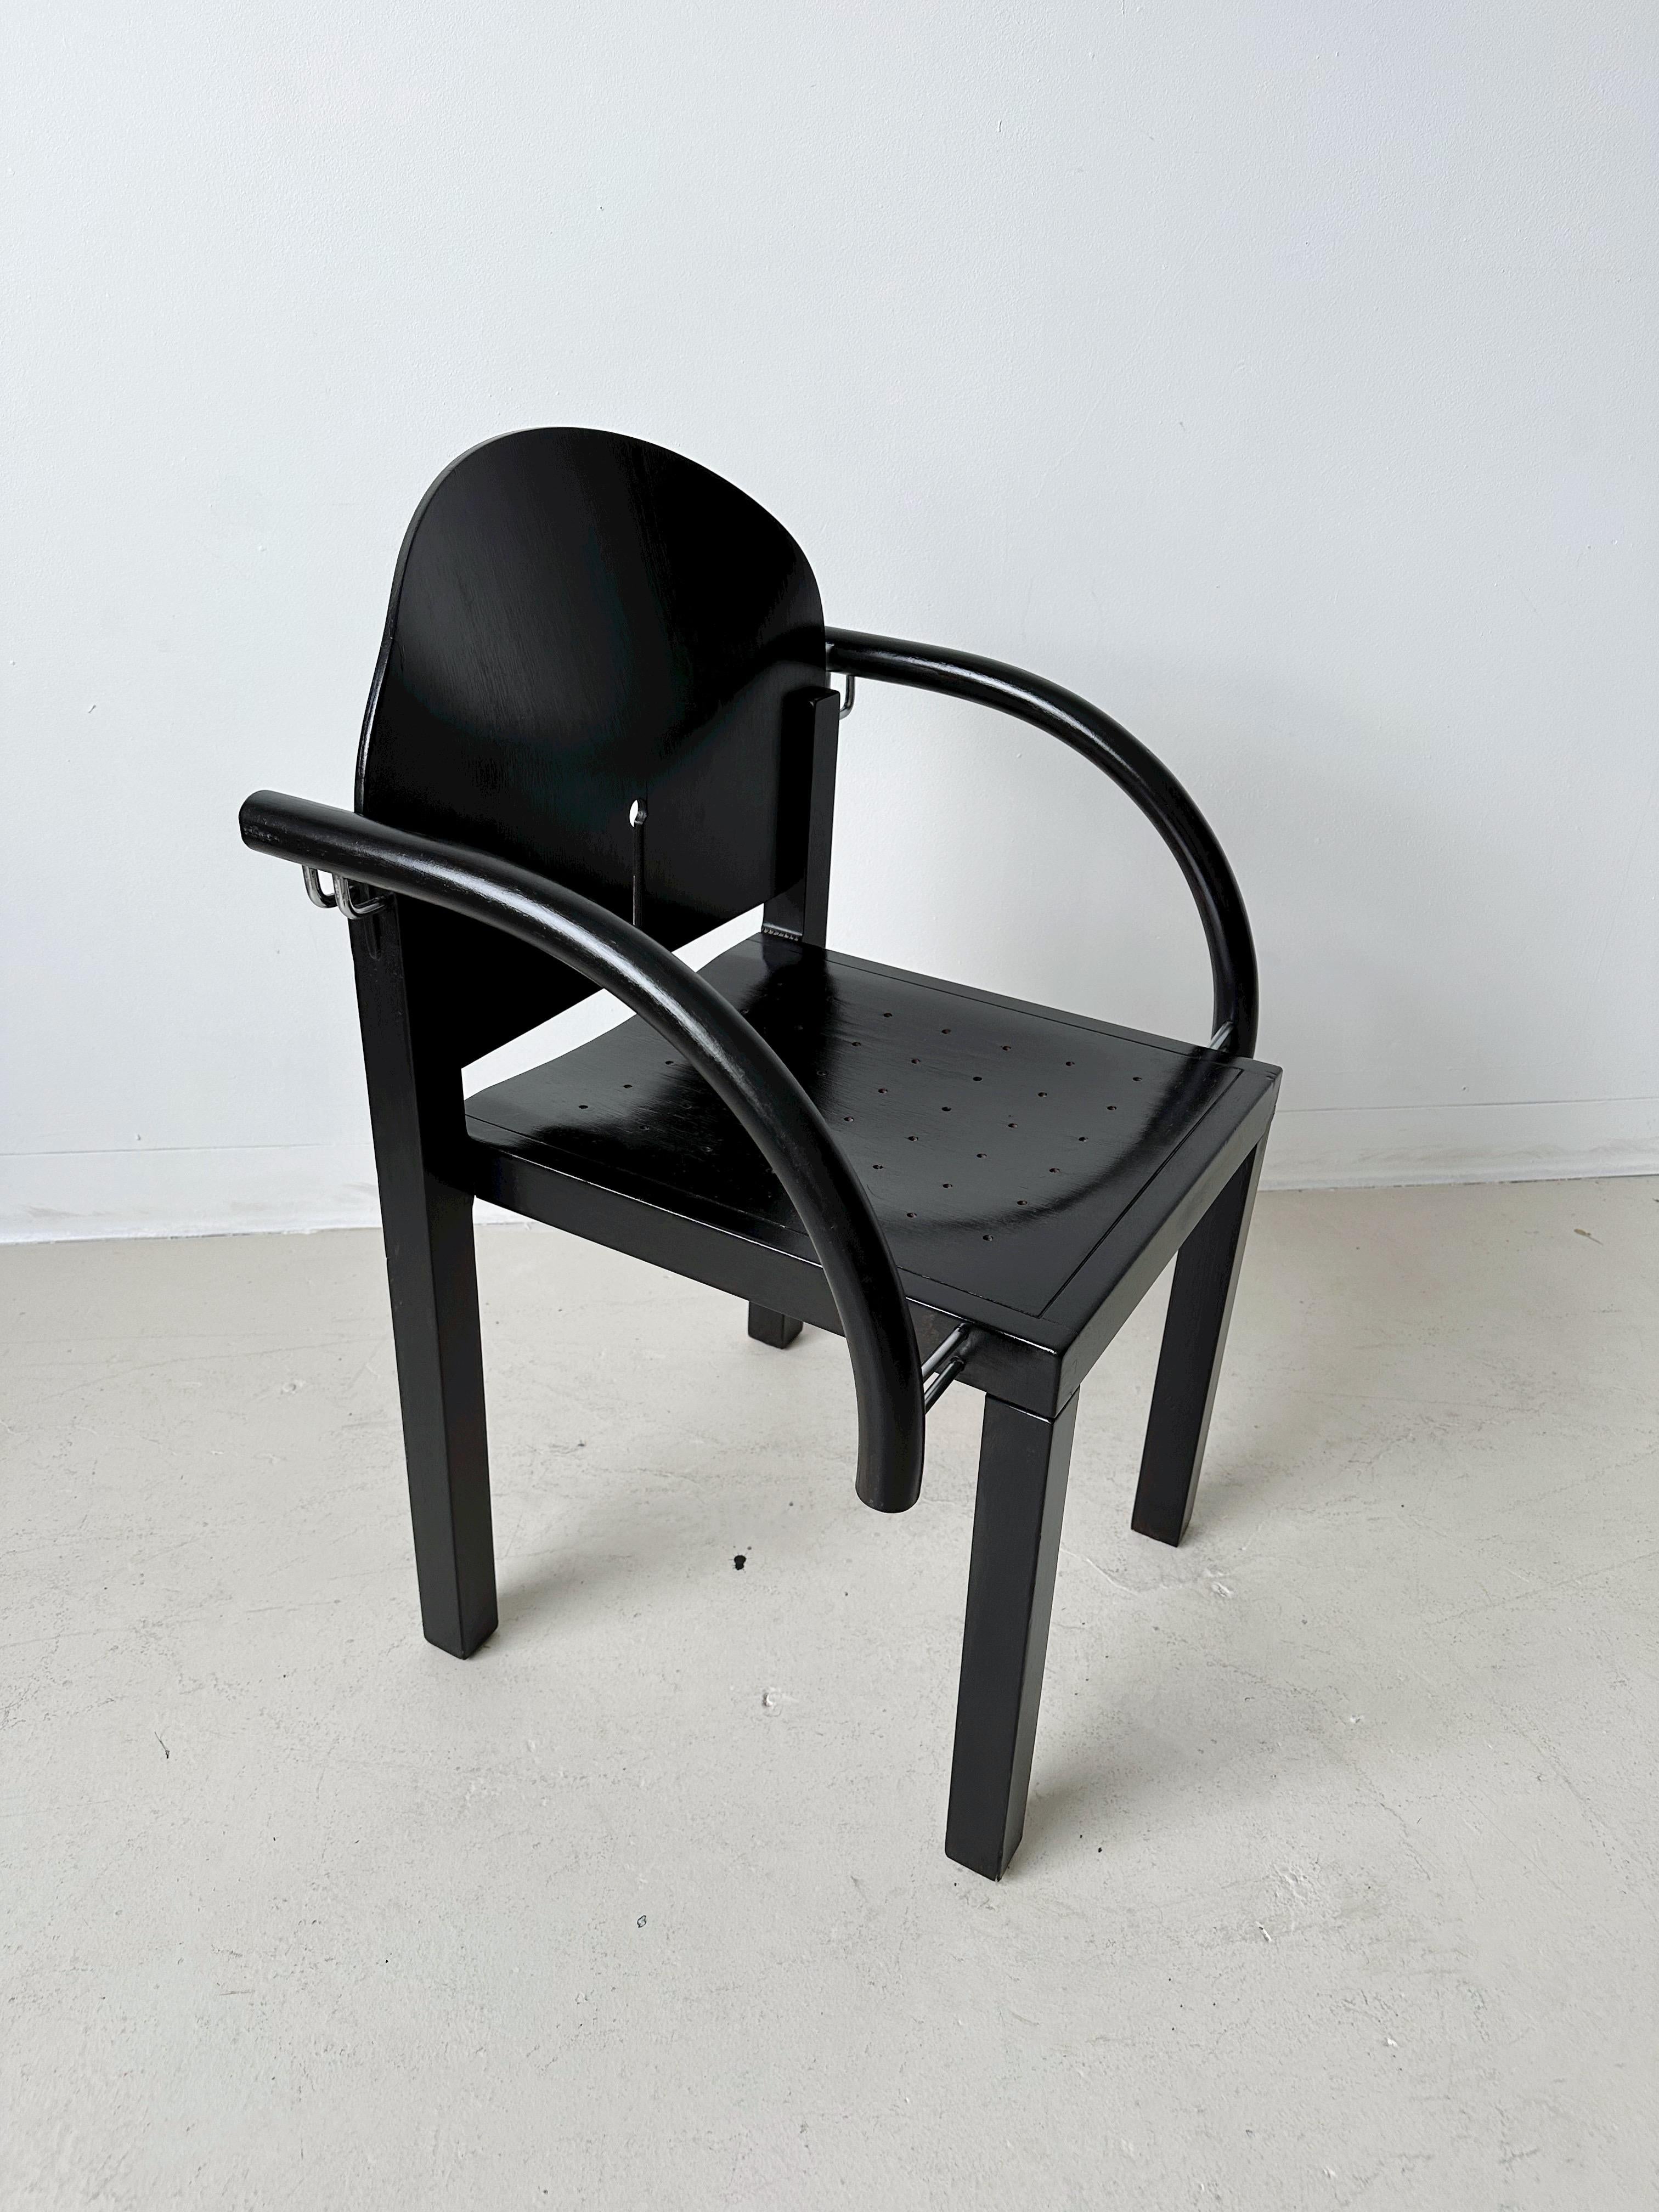 Late 20th Century Black Side Chair Attributed to Arno Votteler for Knoll Eclipse Chair